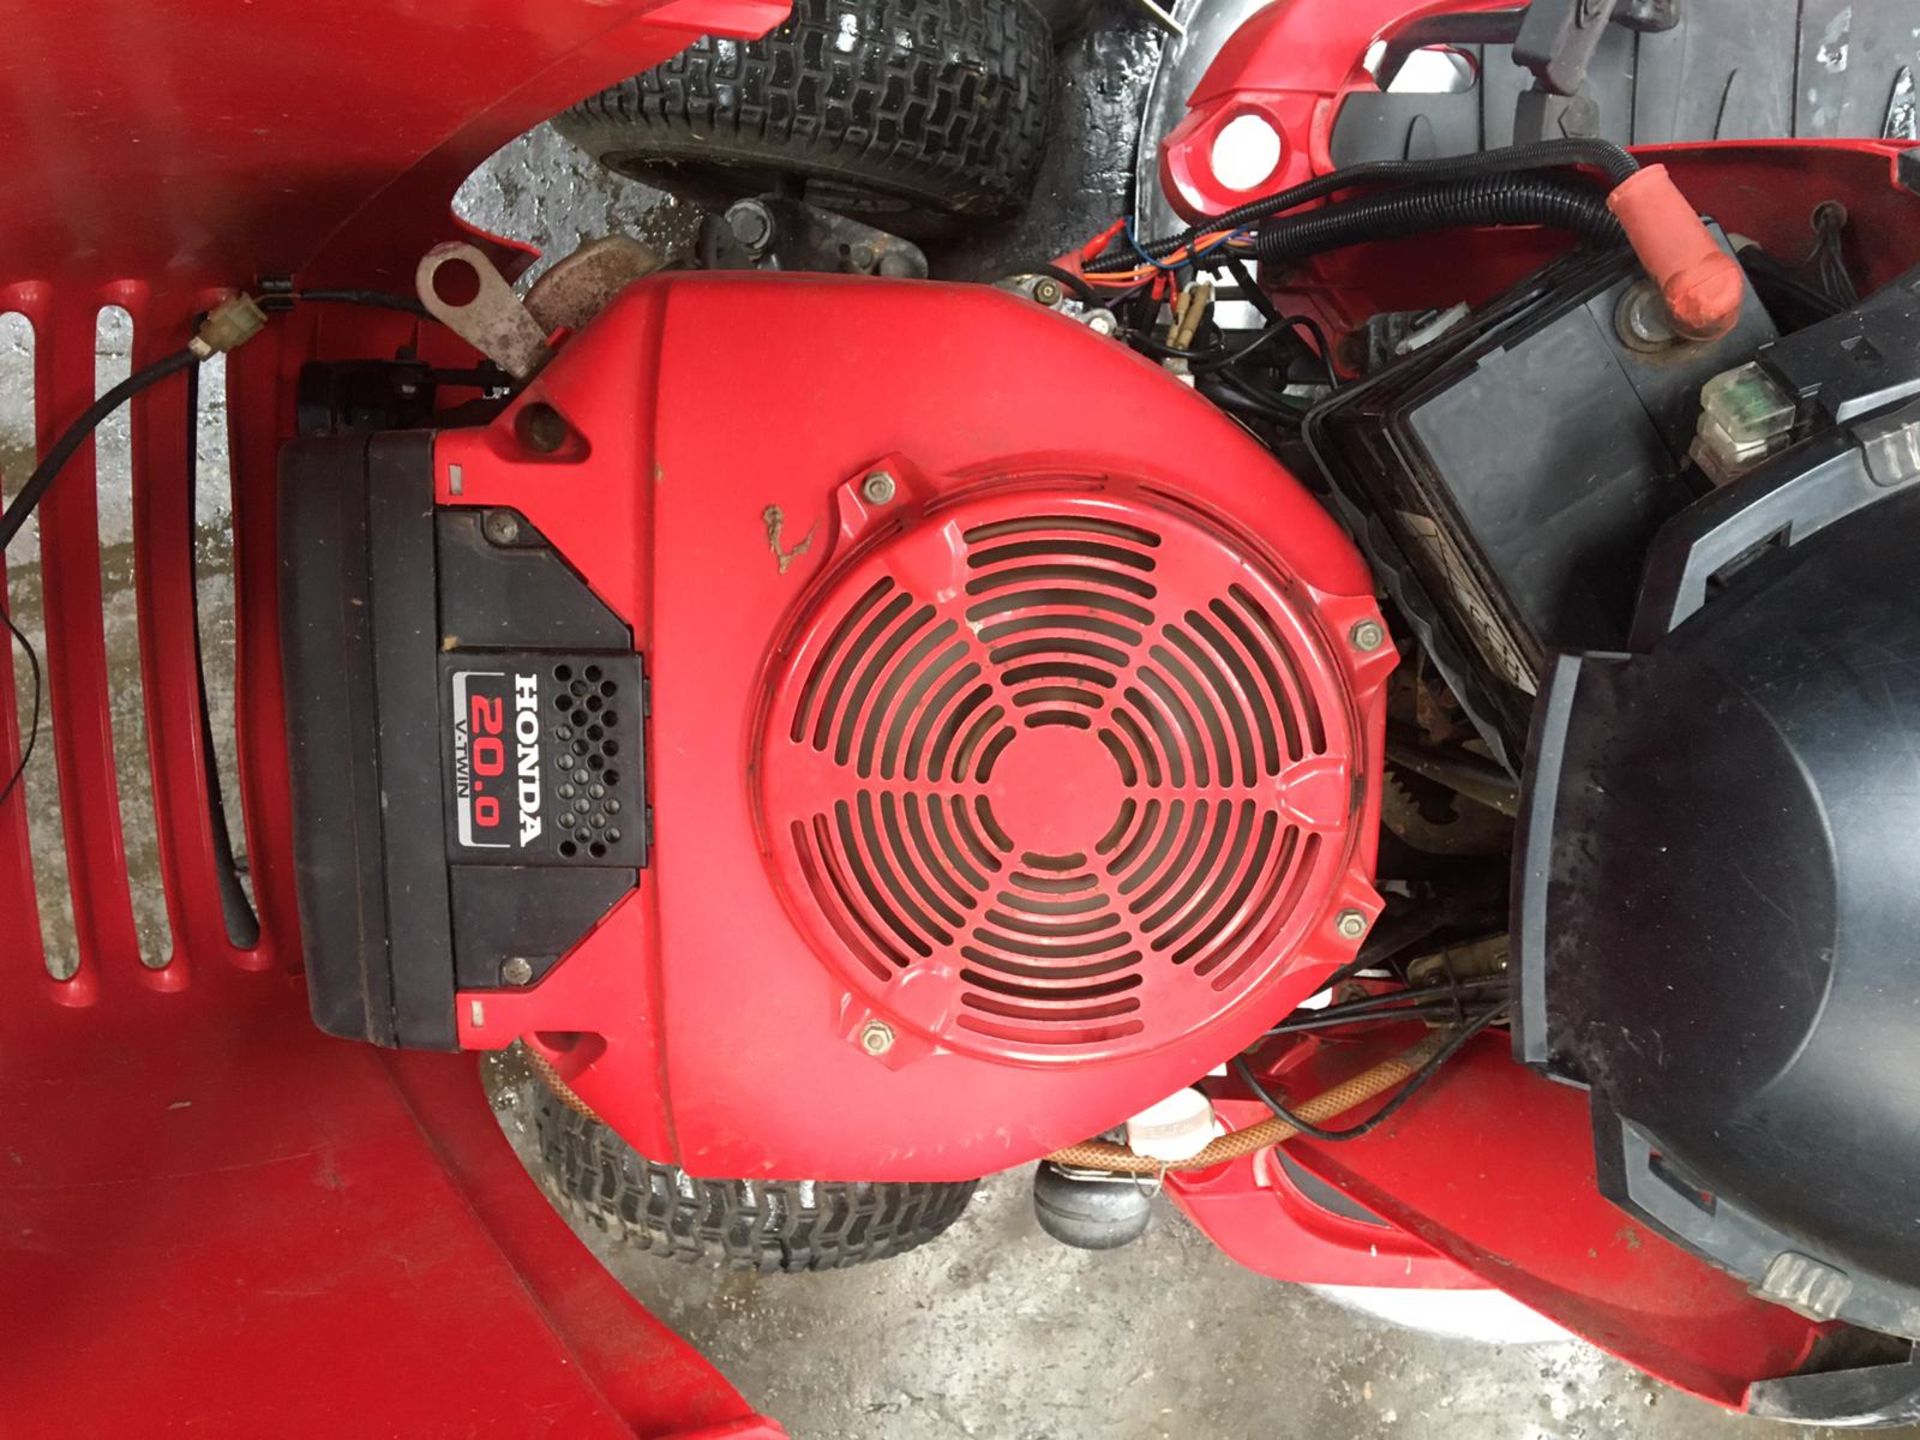 HONDA V-TWIN 2620 RIDE ON LAWN MOWER, HYDROSTATIC, STARTS AND RUNS, ELECTRIC TIP, ONLY 200.1 HOURS - Image 11 of 13